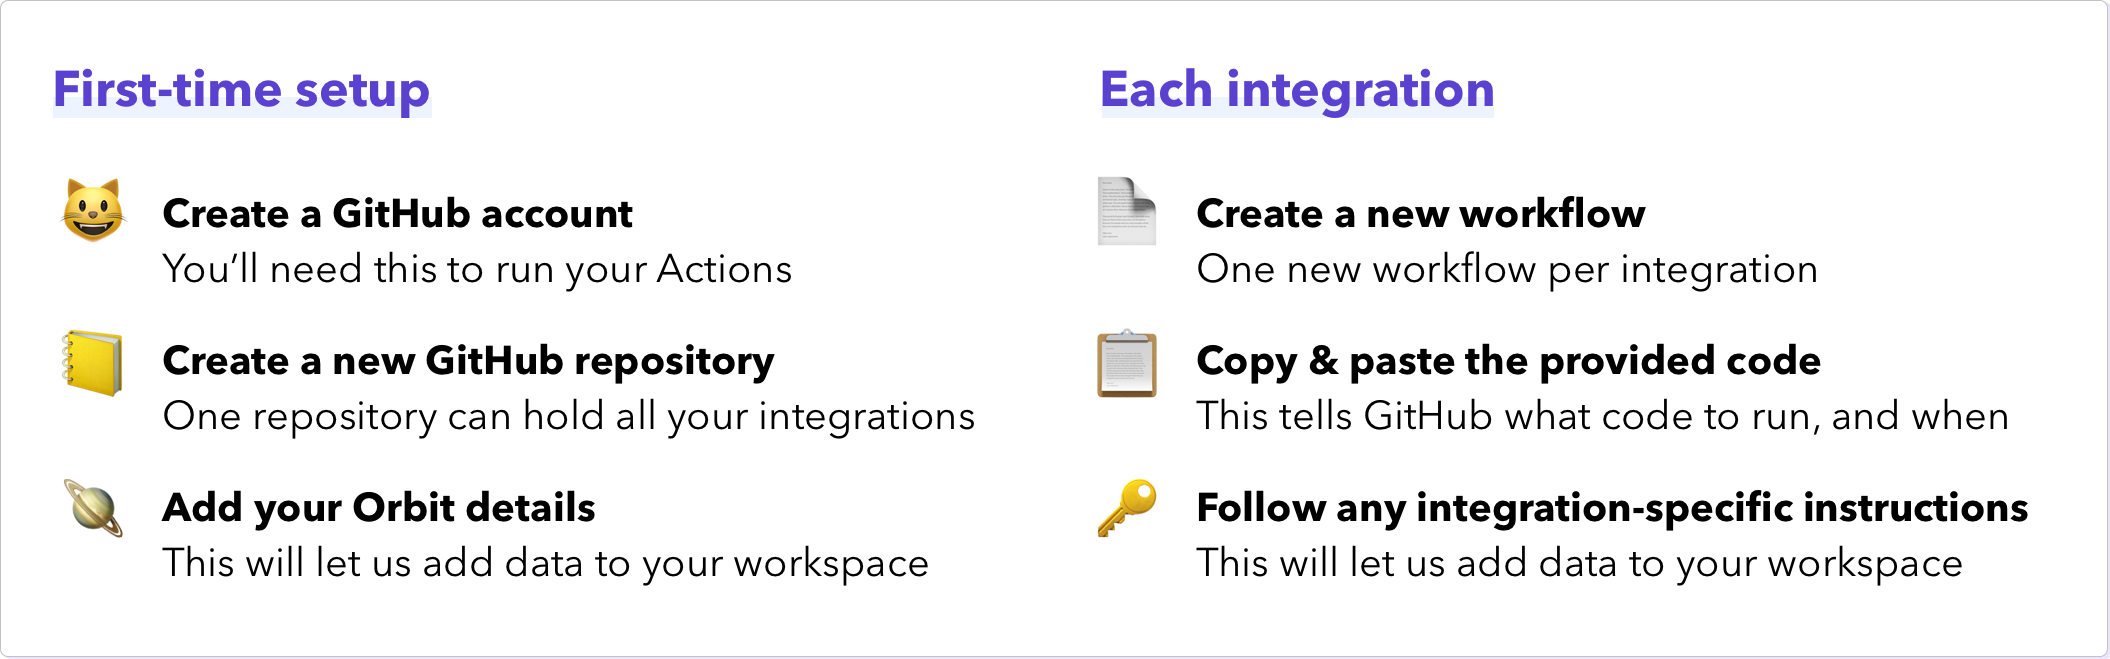 First-time setup: create a GitHub account, create a new GitHub repository, add your Orbit details. Each integration: create a new workflow, copy & paste the provided code, follow and integration-specific instructions.